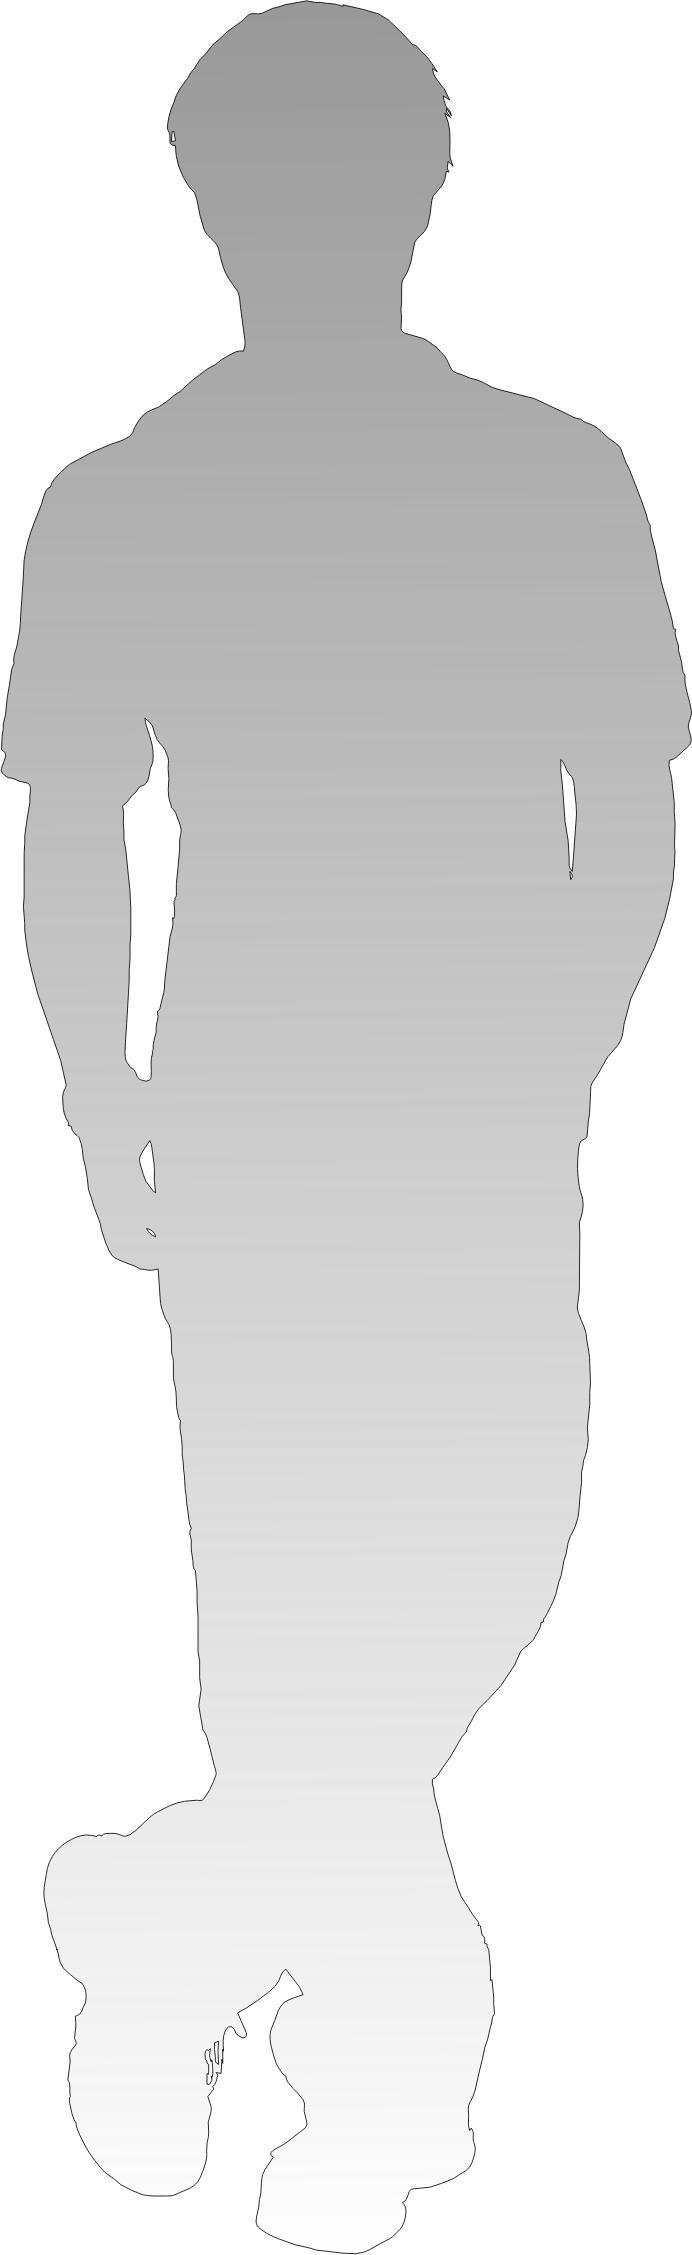 shadow of person - standing leg cross and put hands in the pockets png transparent